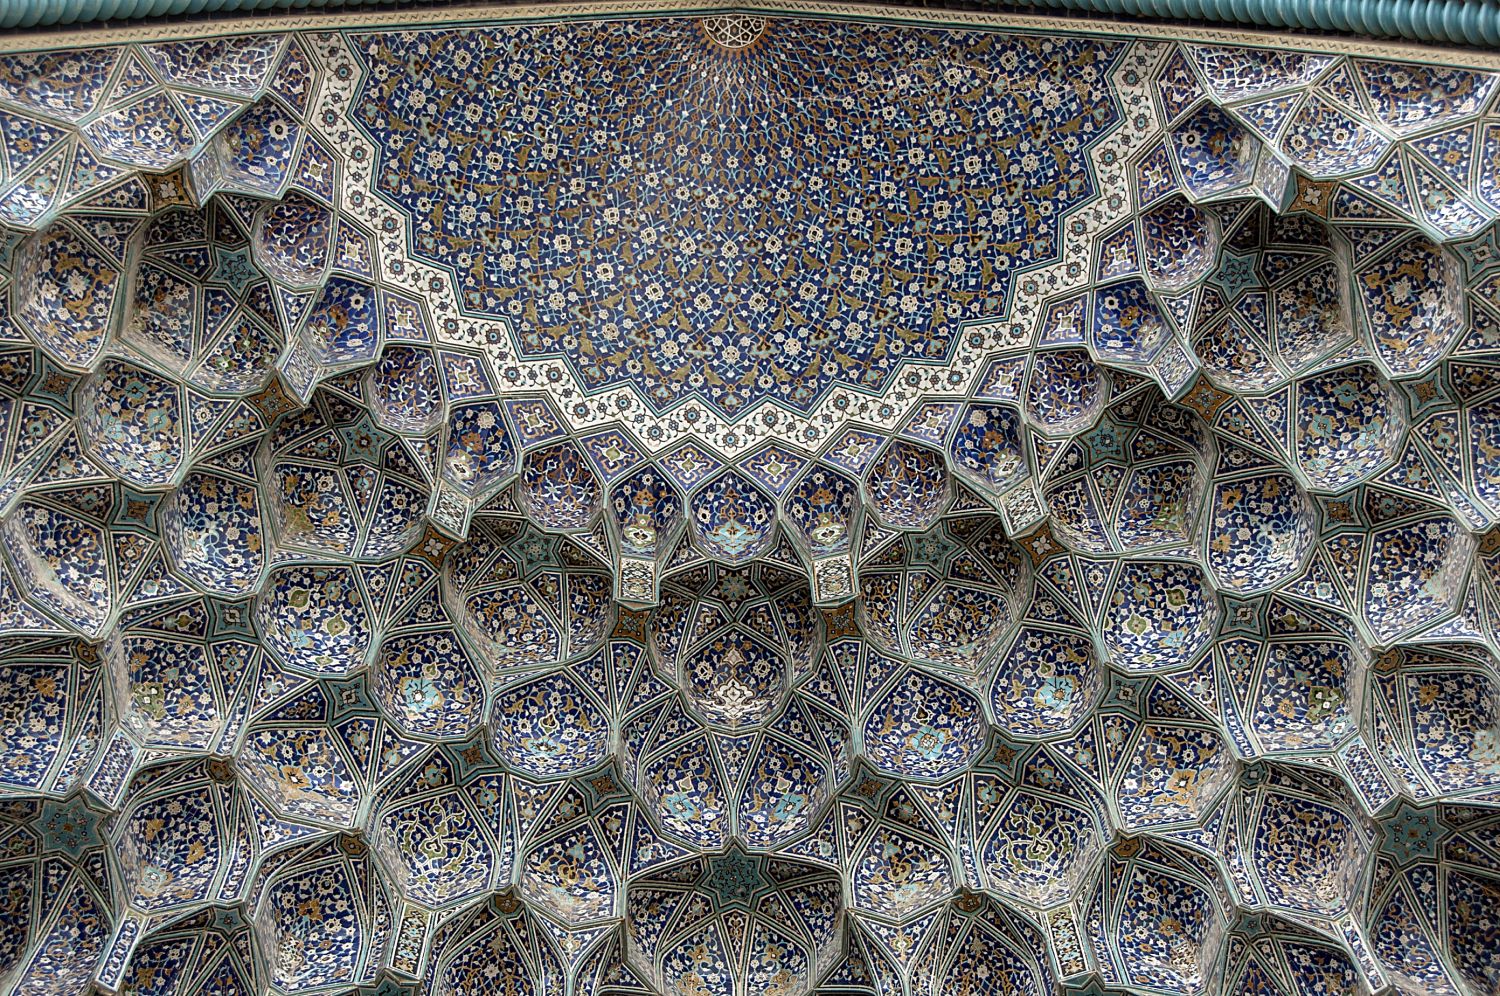 Detail view of muqarnas vault in entrance portal, showing apex of semidome.